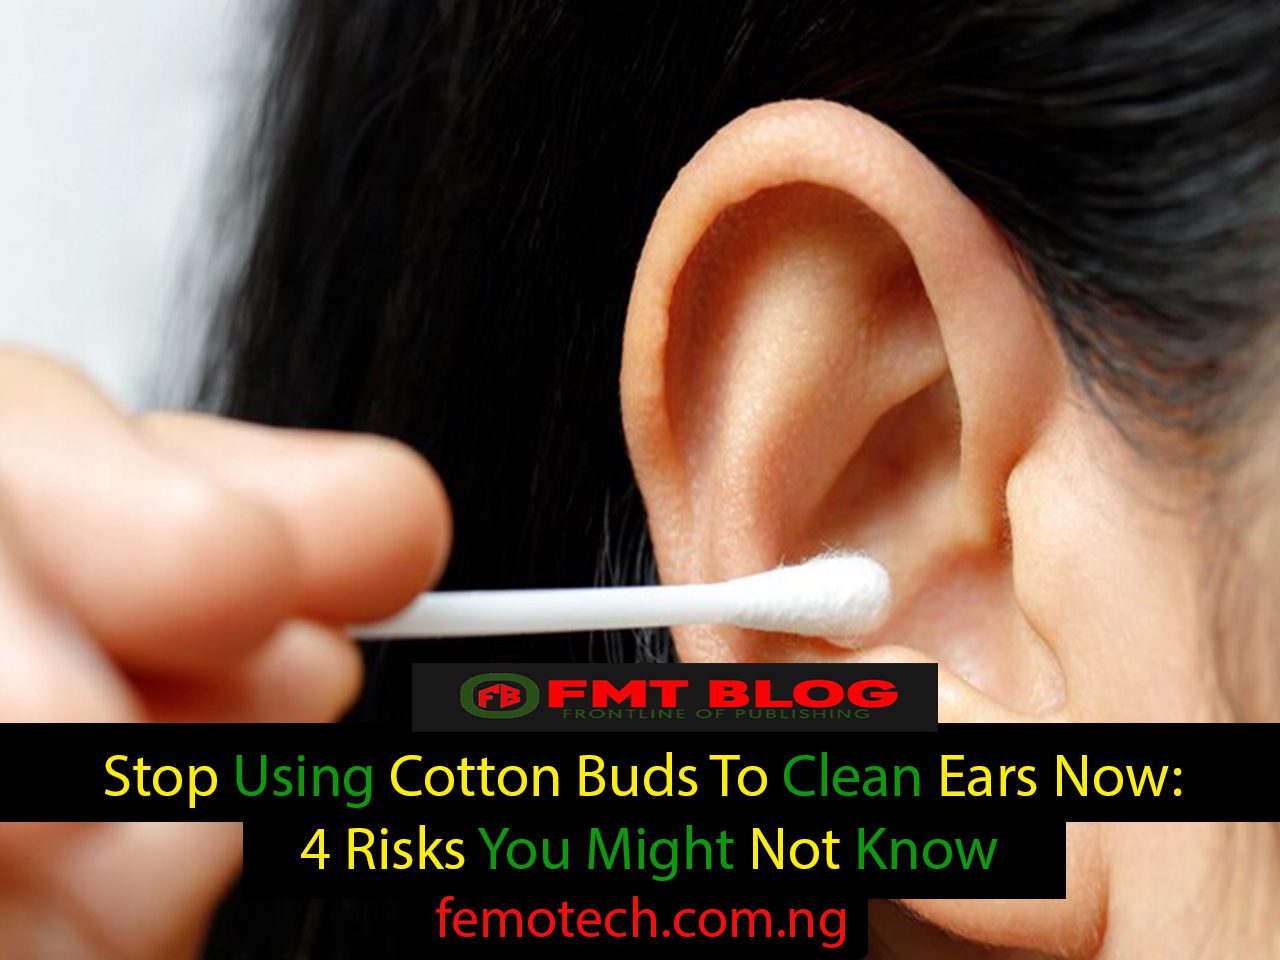 Stop using cotton buds to clean ears now: 4 Risks You Might Not Know